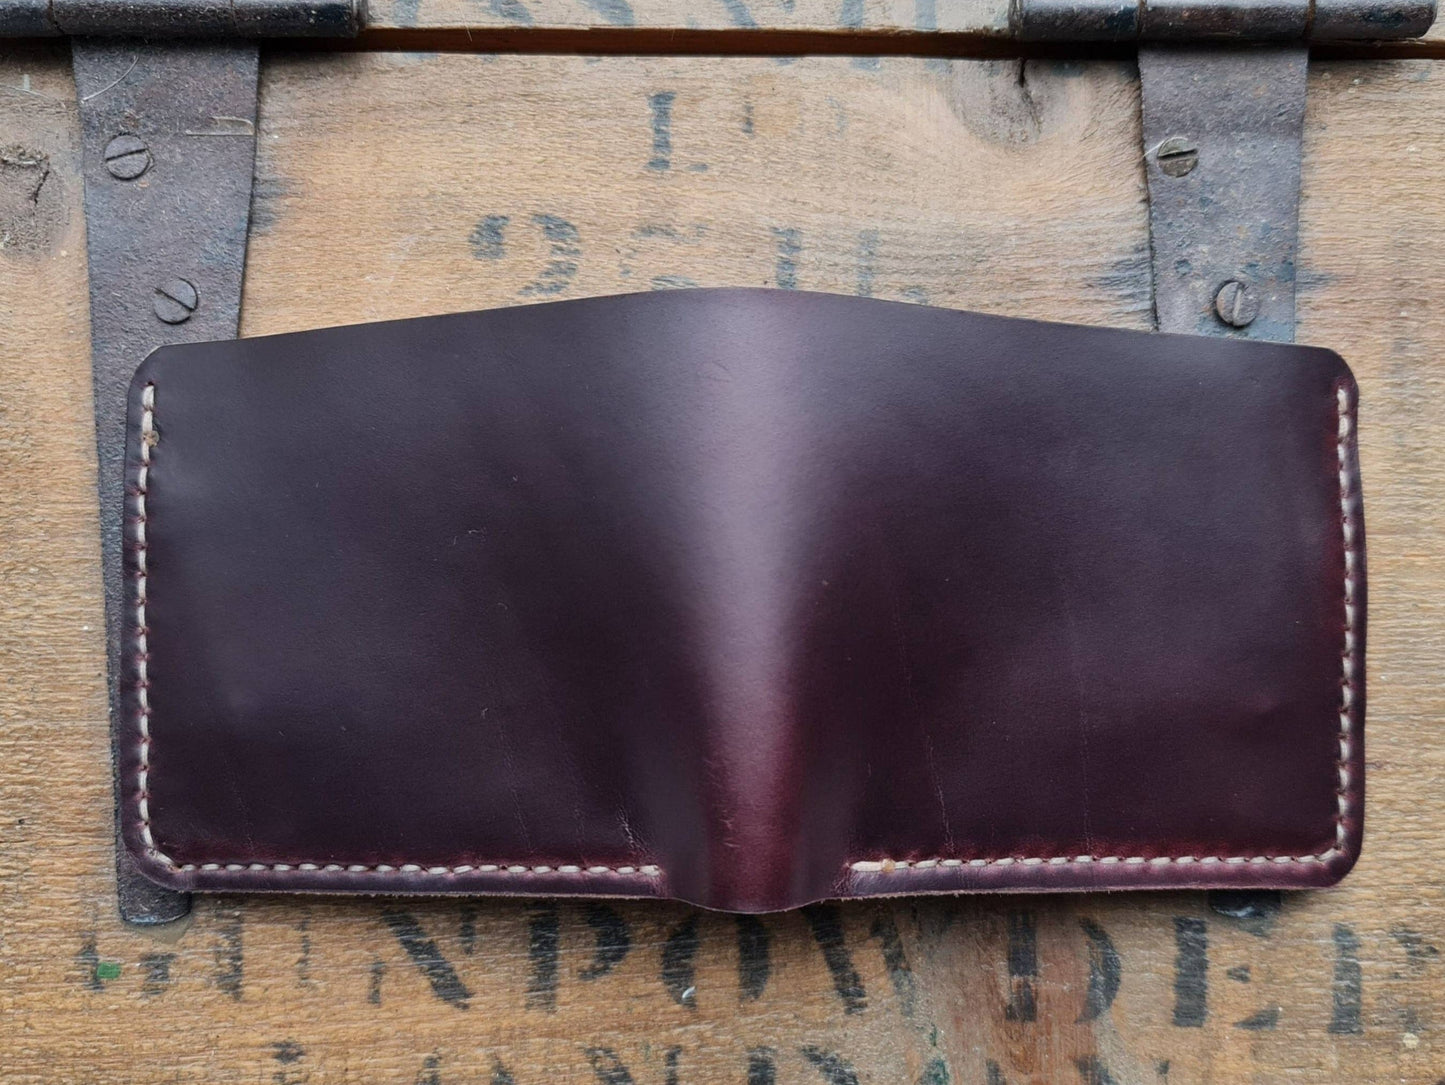 The Frontiersman men's leather wallet with cash and card holder in Burgundy leather - open back